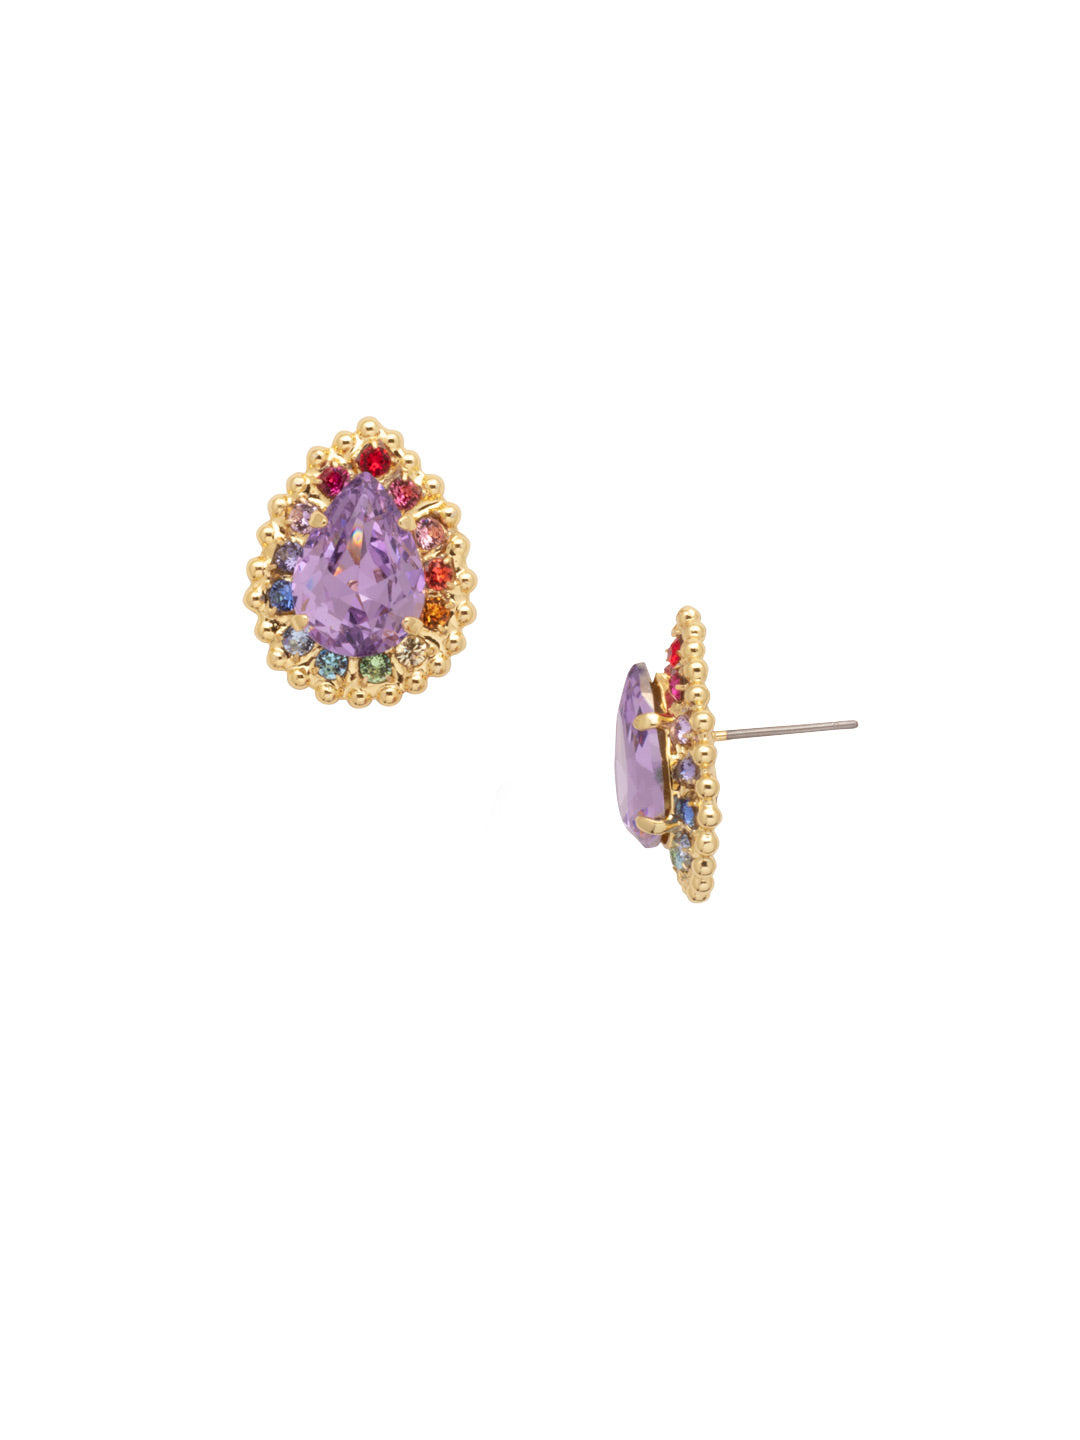 Perfect Pair Stud Earrings - ECQ15BGPRI - <p>Not your typical earring! These posts keep it casual while still bringing on the bling. A large teardrop gemstone and over a small round stones pack in the shine, while metallic detail wrap around the entire piece. From Sorrelli's Prism collection in our Bright Gold-tone finish.</p>